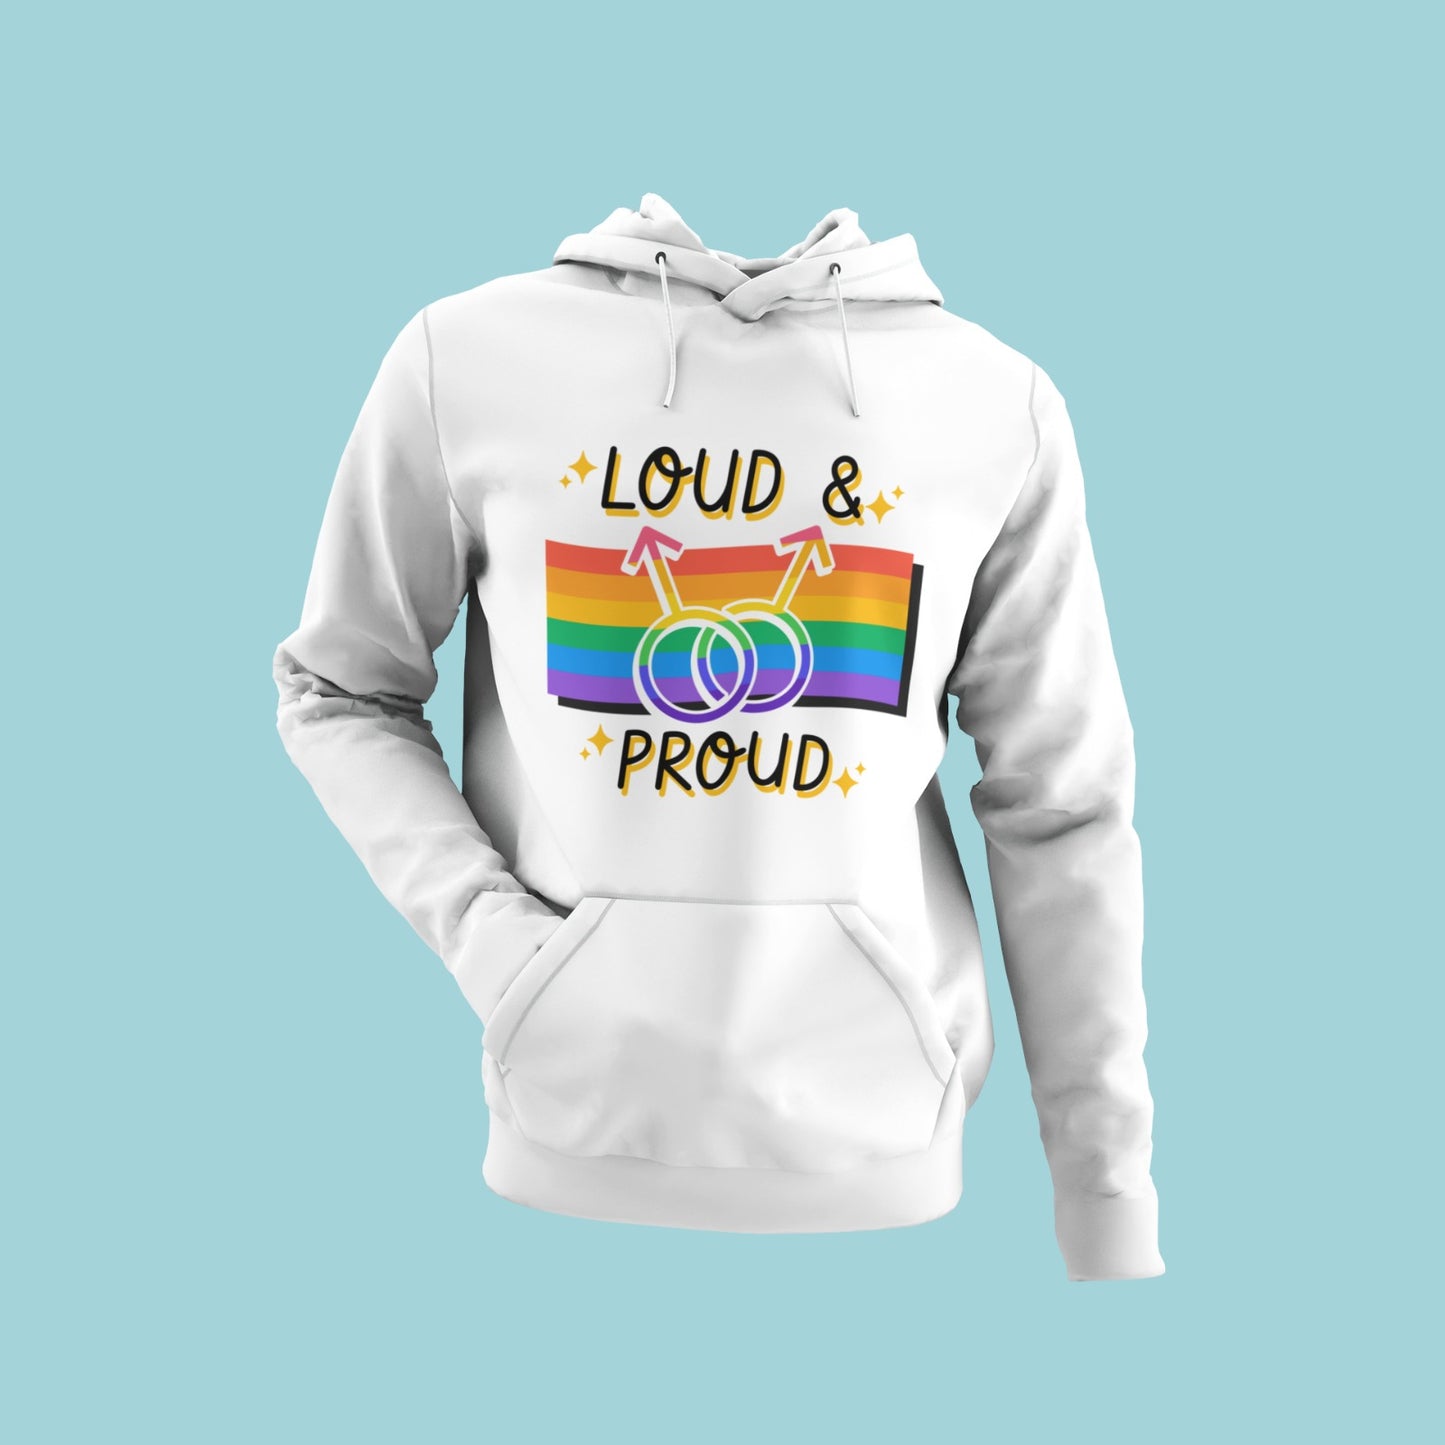 Shop this white hoodie with a bold "Loud & Proud" slogan and an eye-catching rainbow flag design featuring interlocked male symbols. Made of soft and comfortable fabric, it's perfect for showing your support for the LGBTQ+ community in style. Available in multiple sizes.